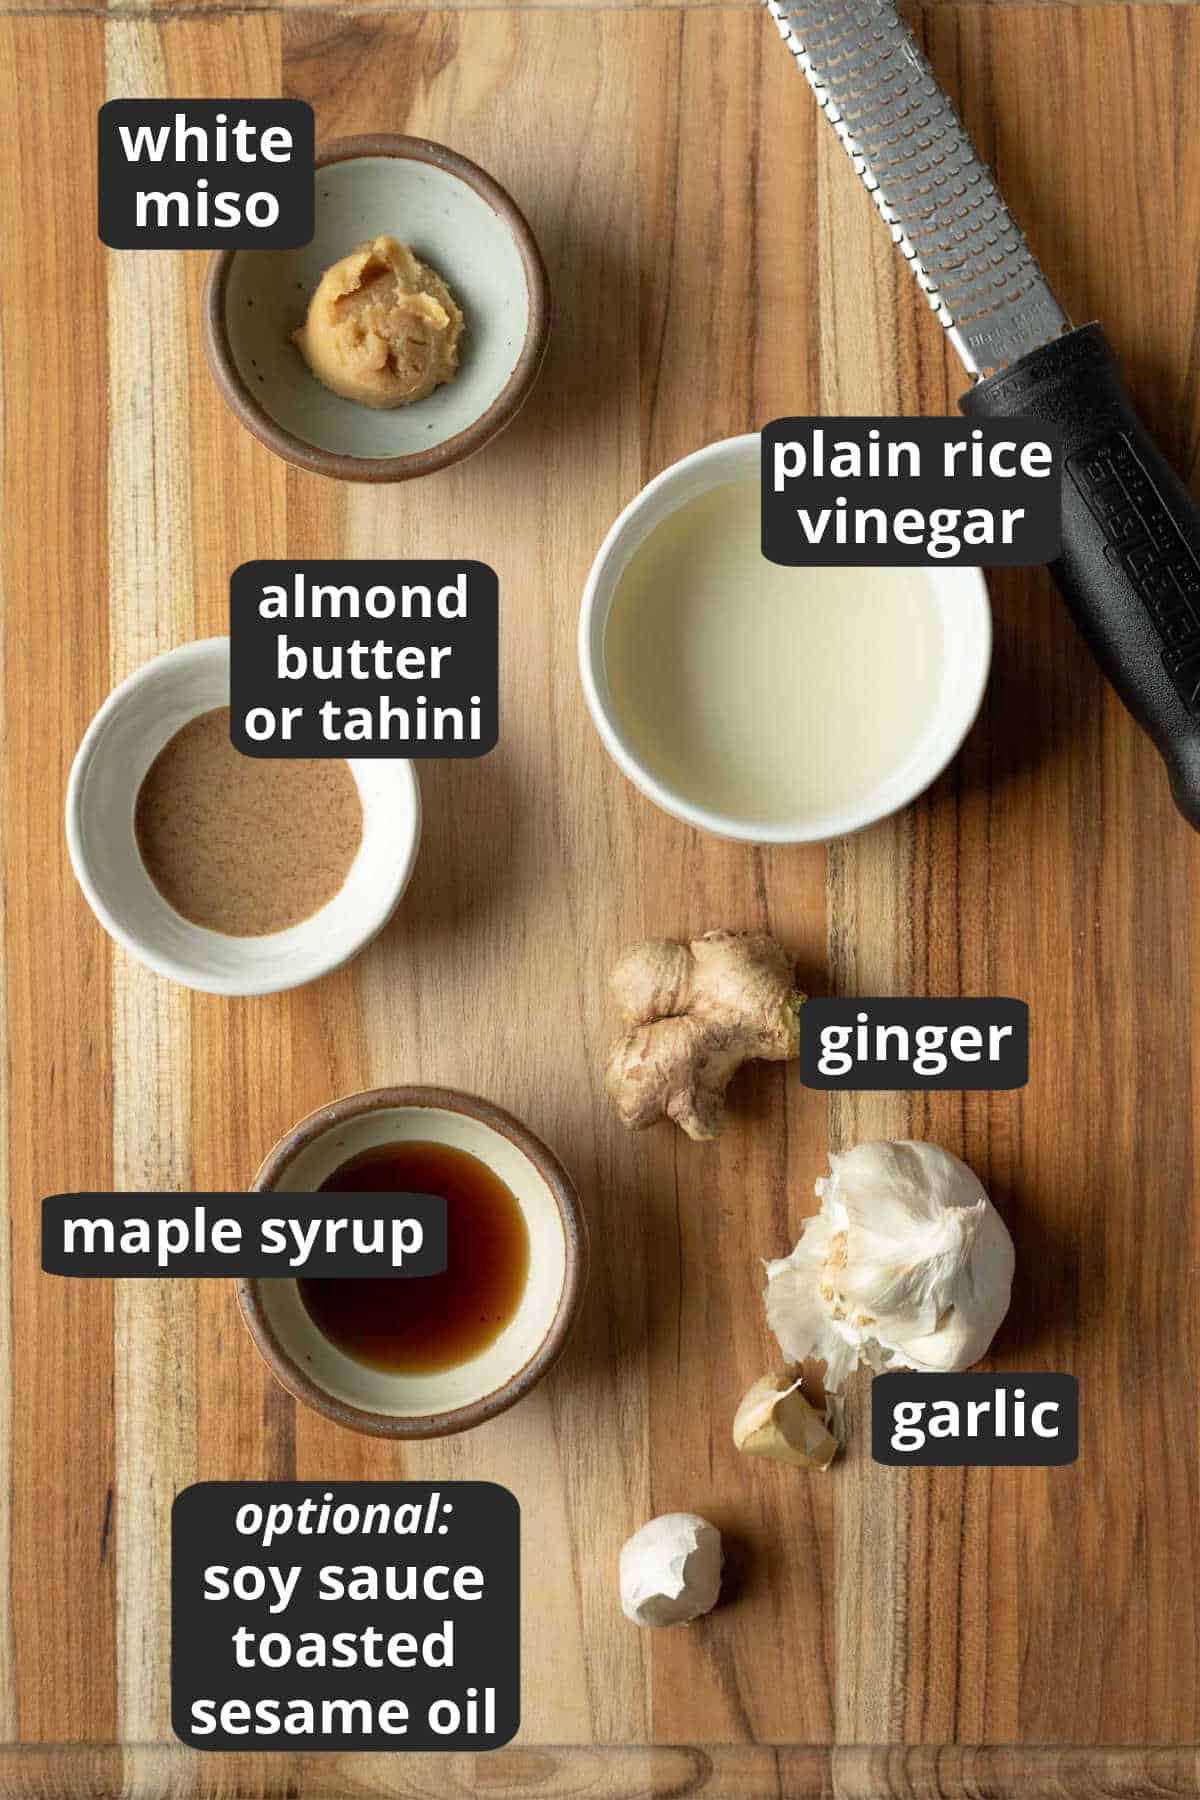 A labeled photo of the 7 key ingredients needed to make miso sauce and dressing.